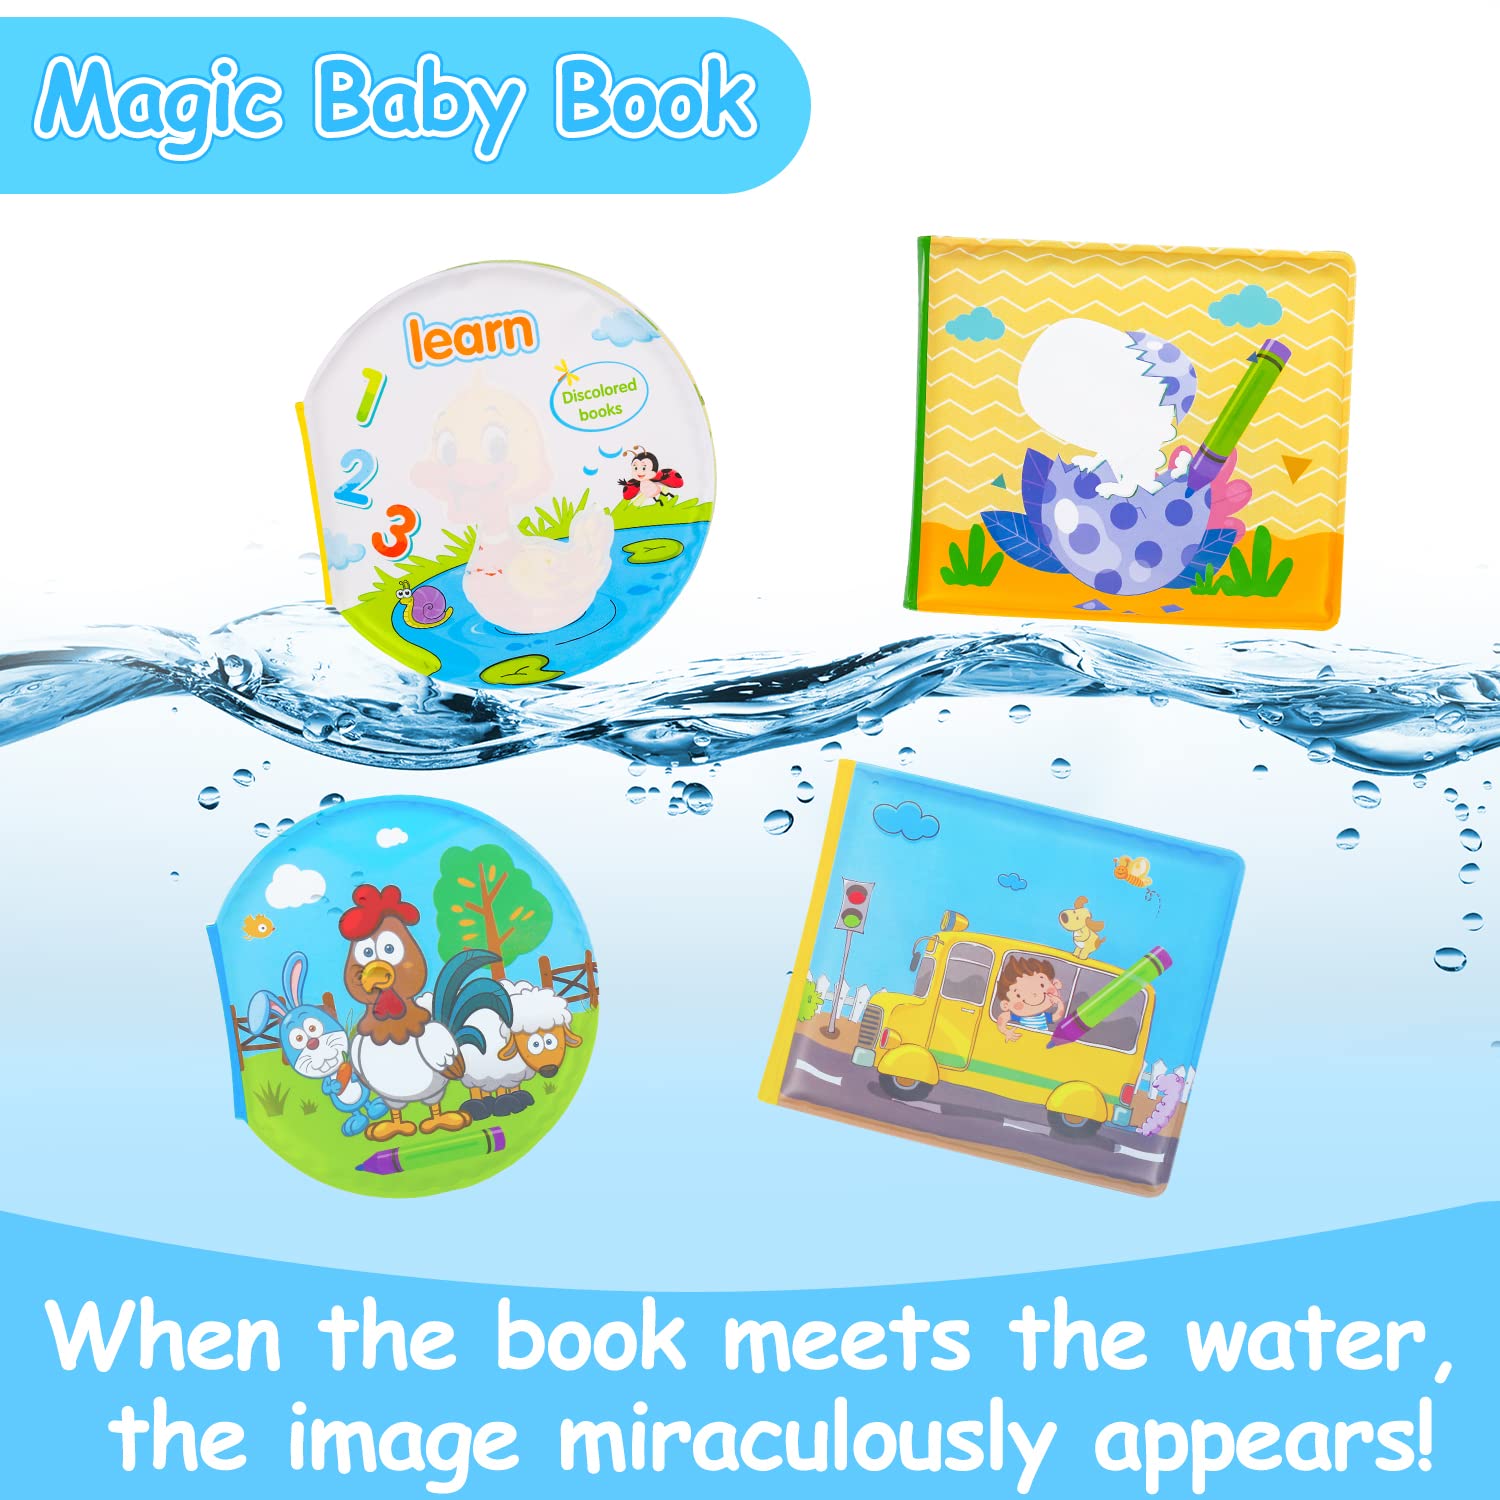 4PCS Bath Books, 2 In 1 Baby Bath Toys & Coloring Books for Toddlers 1-3 Waterproof Mold Free Bathtime Shower Toys 12-18 Months Toddler Bathtub Toys Age 1-2 2-4 1 2 3 Year Old Girl Boy Birthday Gifts